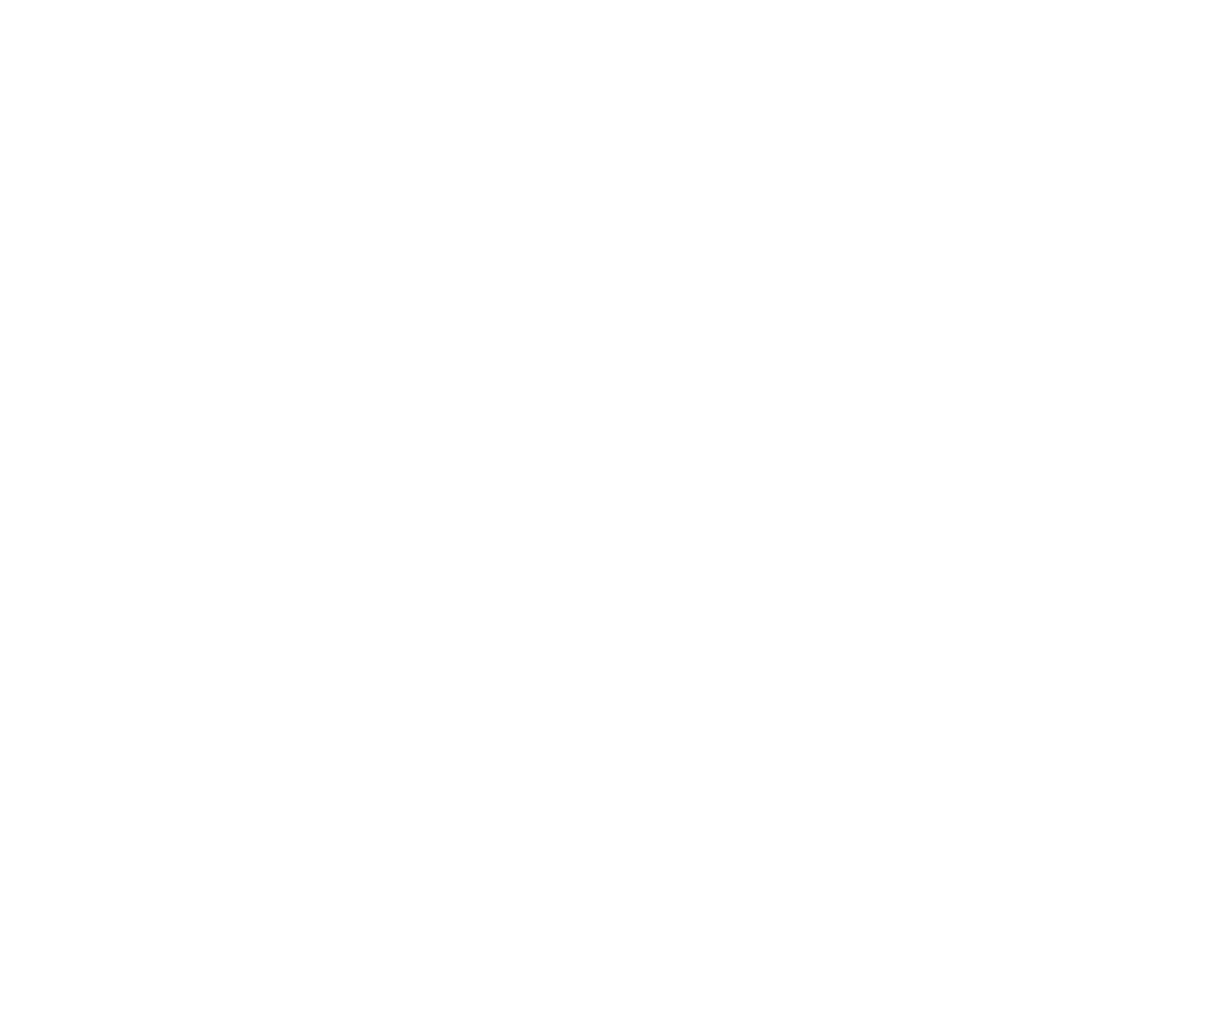 United Nations PNG logo free download, UN logo PNG.